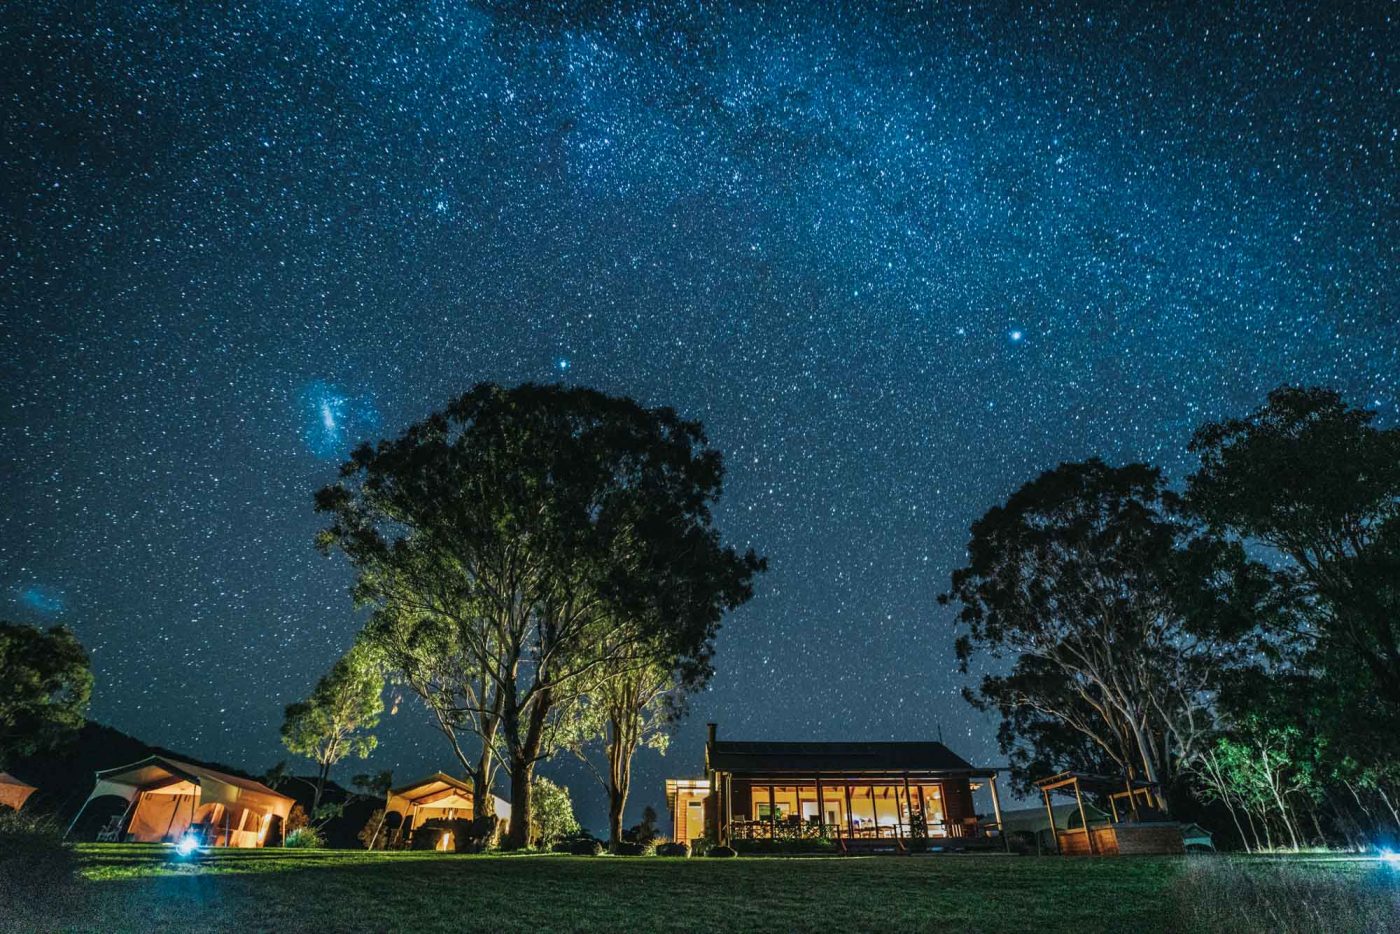 Spicers Canopy Lodge, glamping accommodation on the Scenic Rim Trail